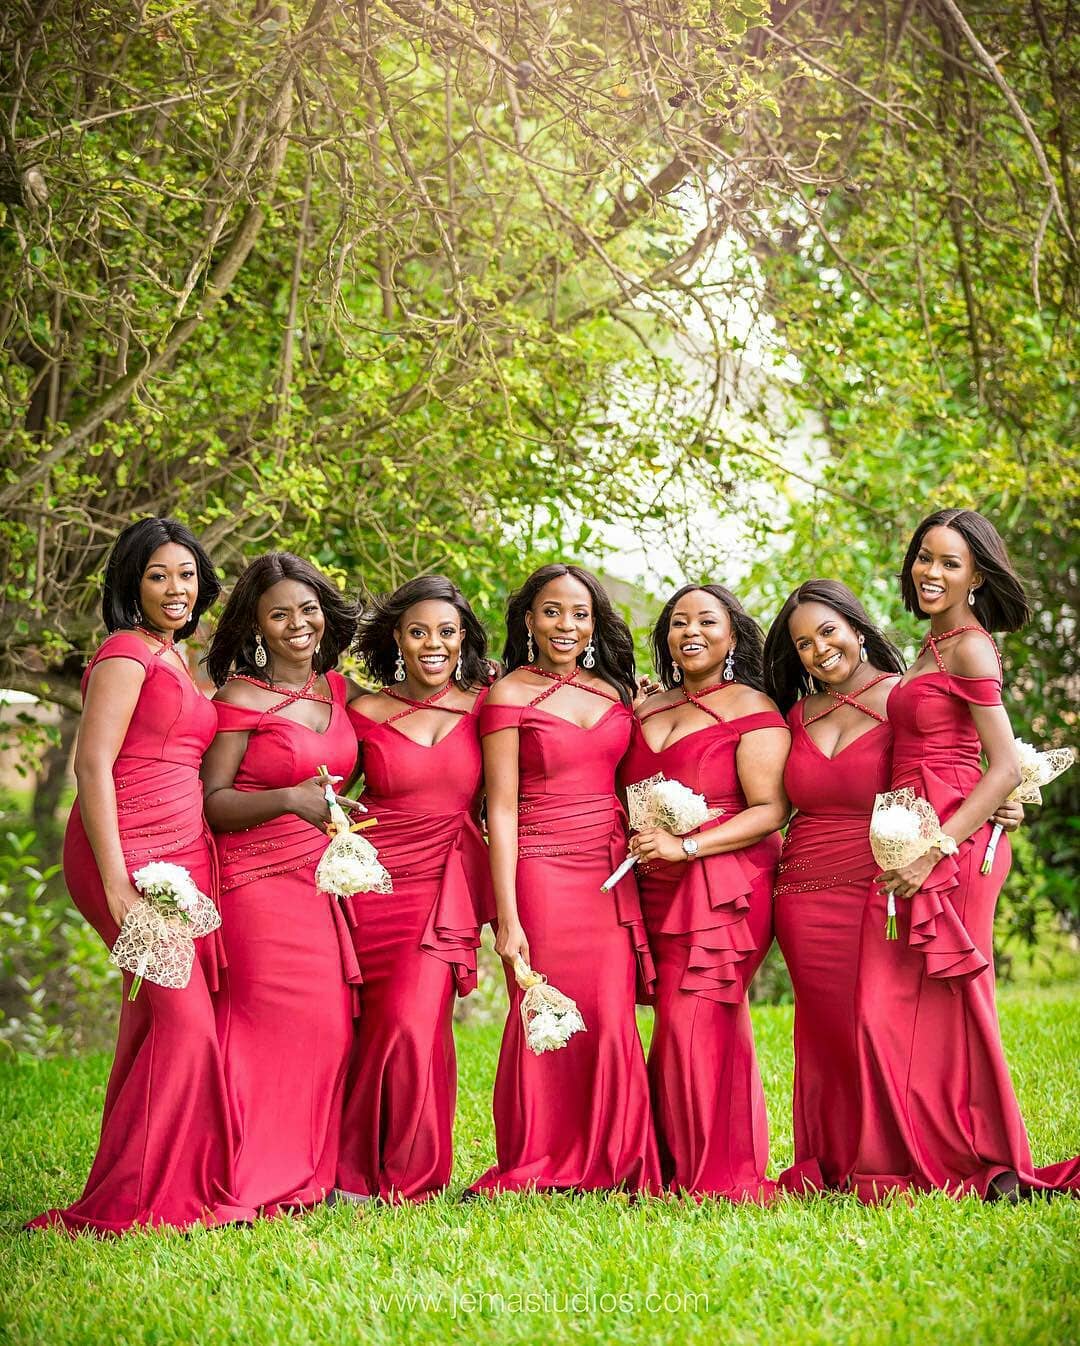 Beautiful Bridesmaid Dresses For Your Big Day